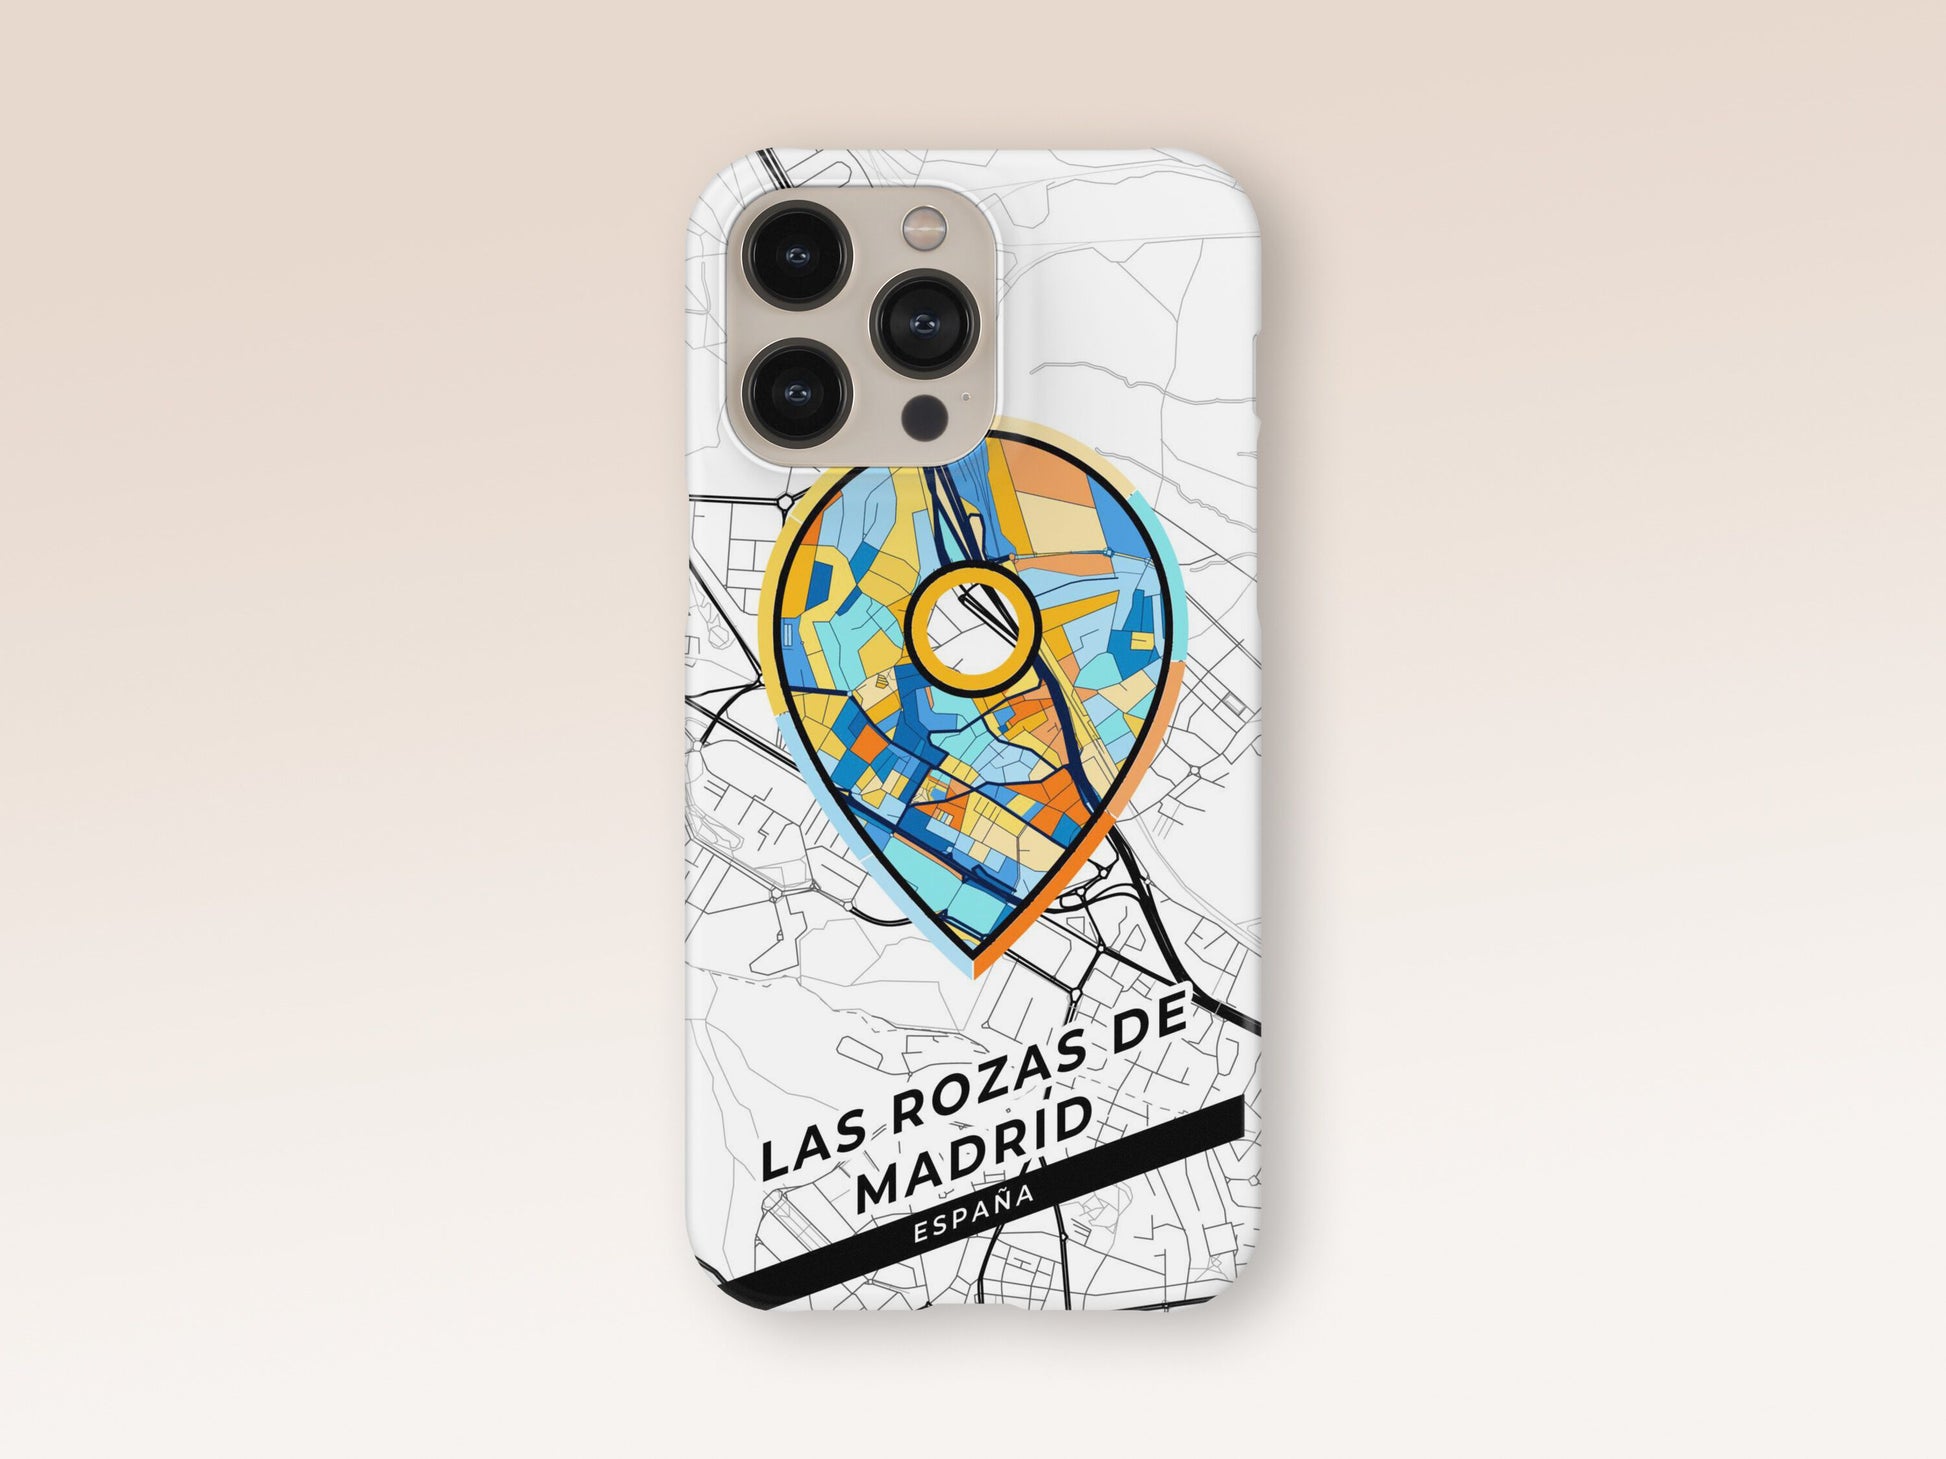 Las Rozas De Madrid Spain slim phone case with colorful icon. Birthday, wedding or housewarming gift. Couple match cases. 1